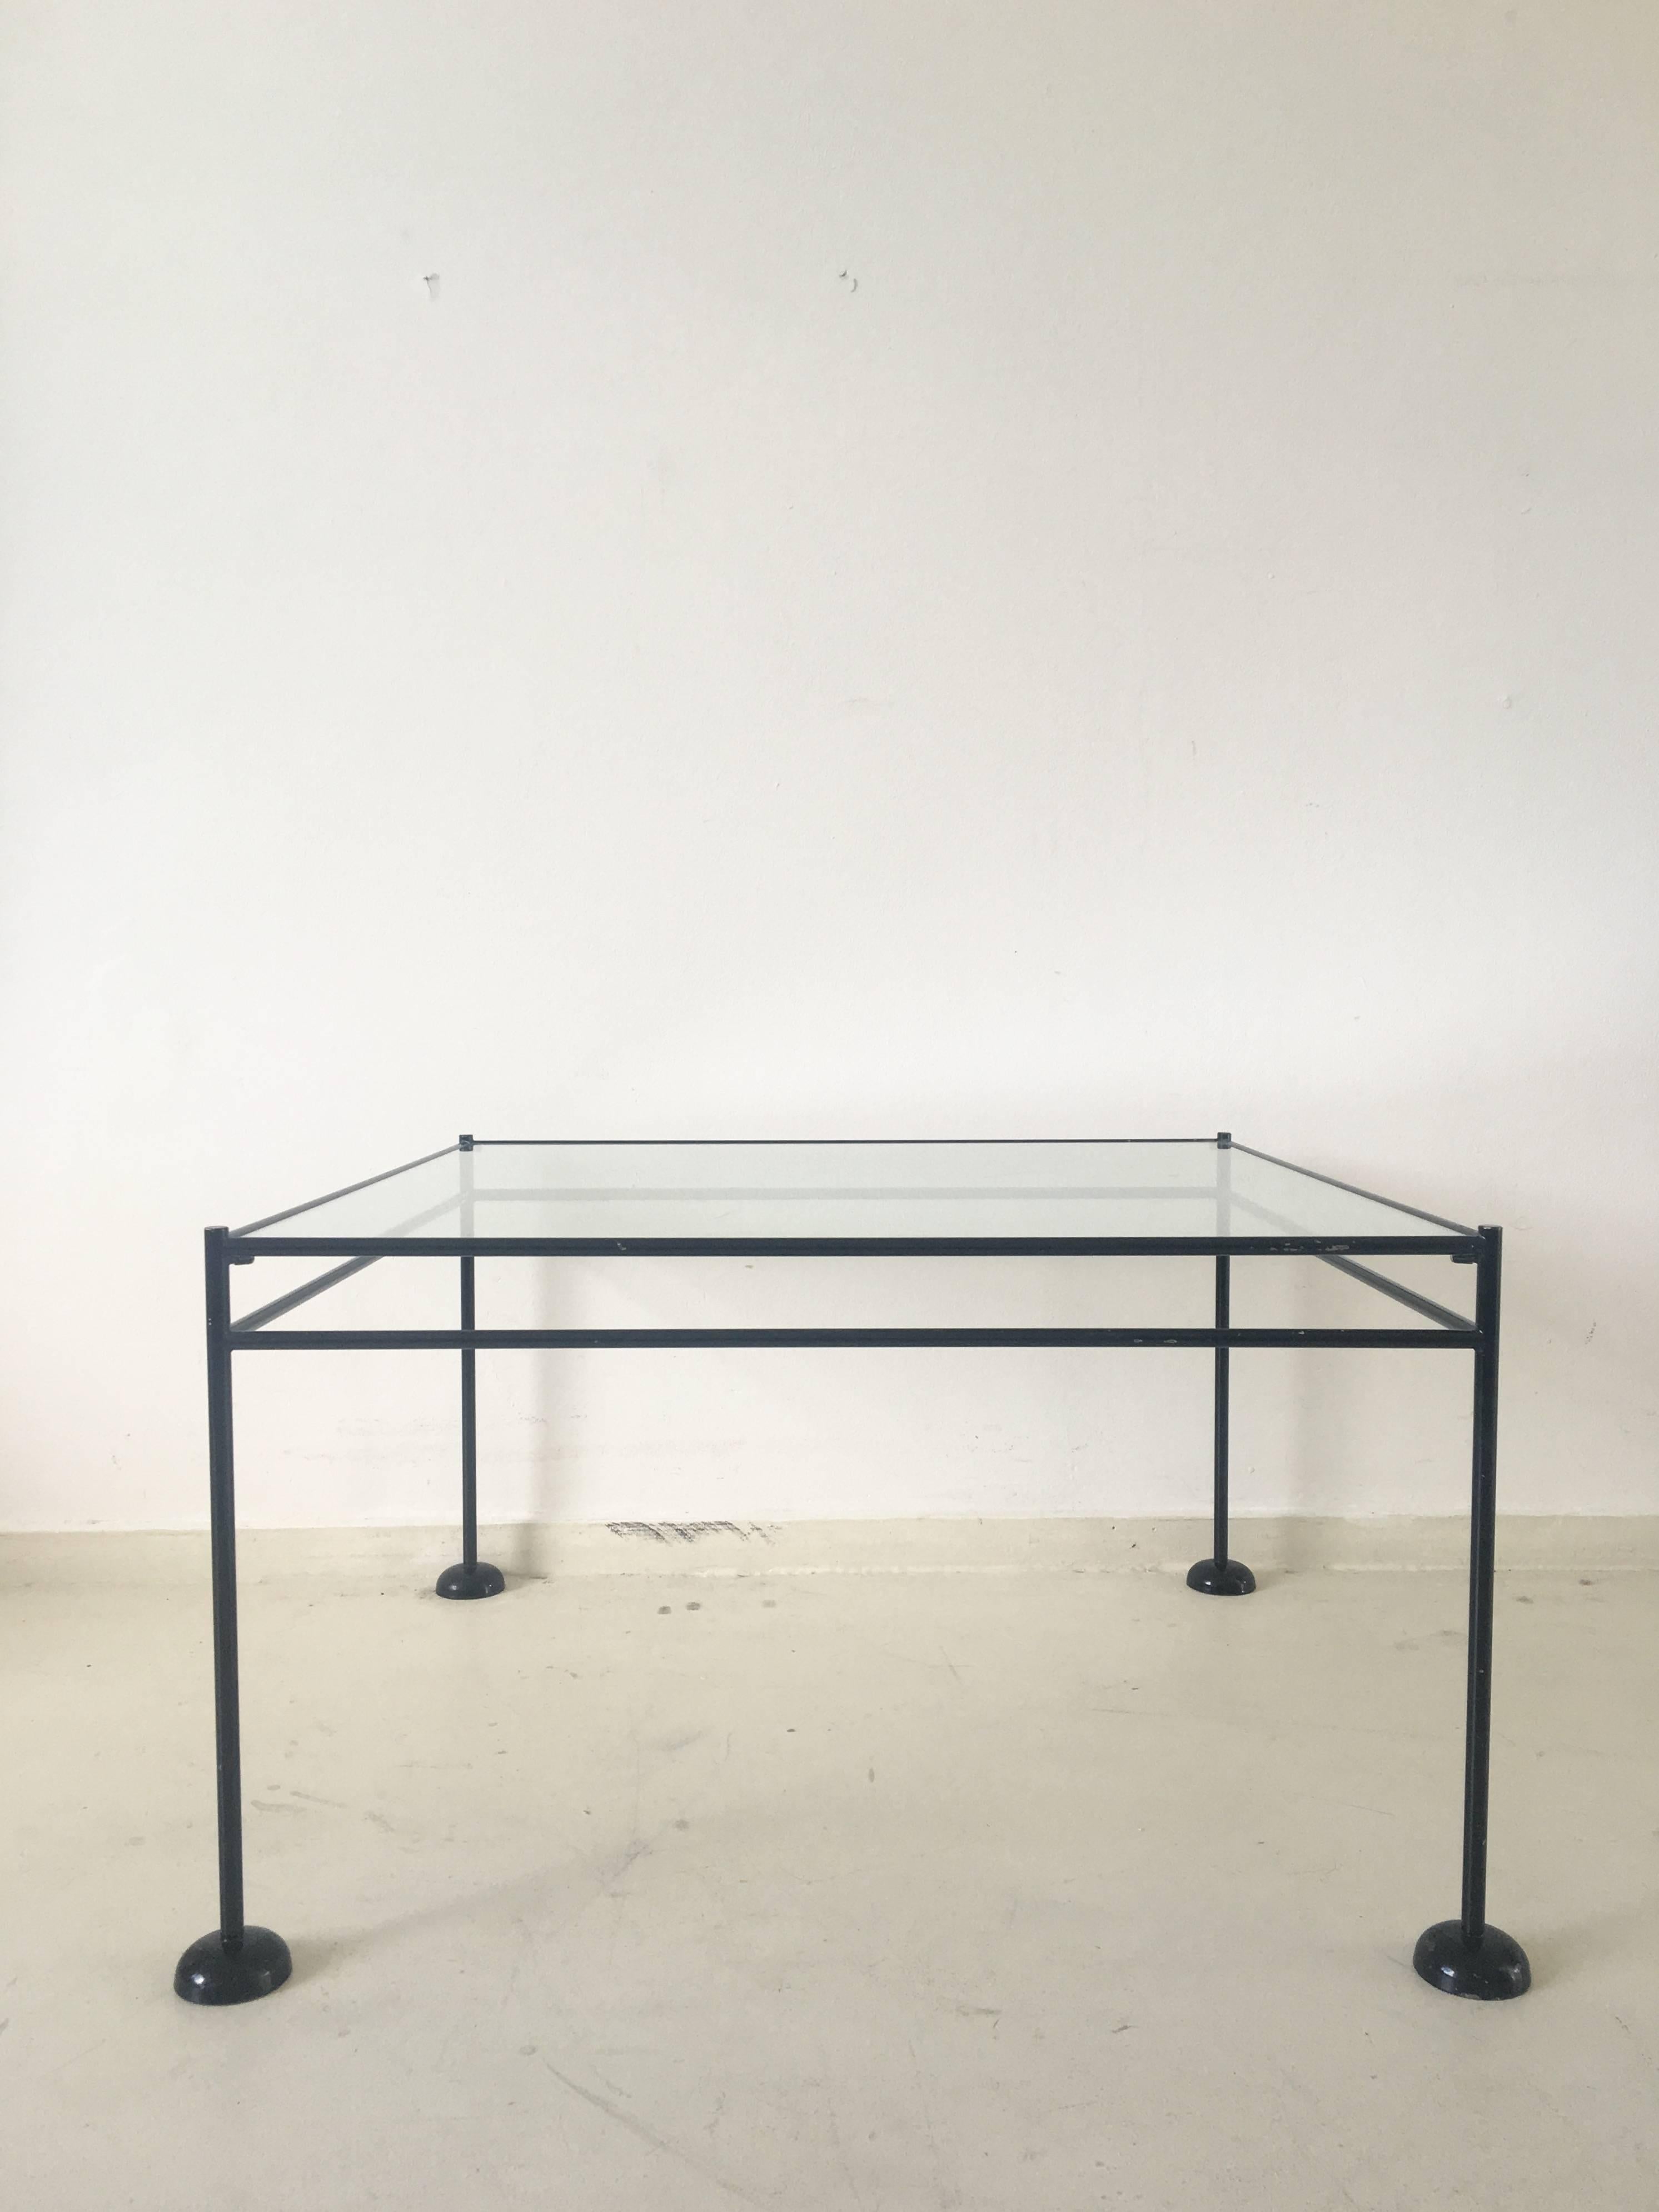 Wonderful Minimalist coffee table with a black lacquered metal base, round metal feet and a glass tabletop.
The table remains in good solid condition but shows some scratches to the glass and some wear to the paint of its frame.
When an Industrial